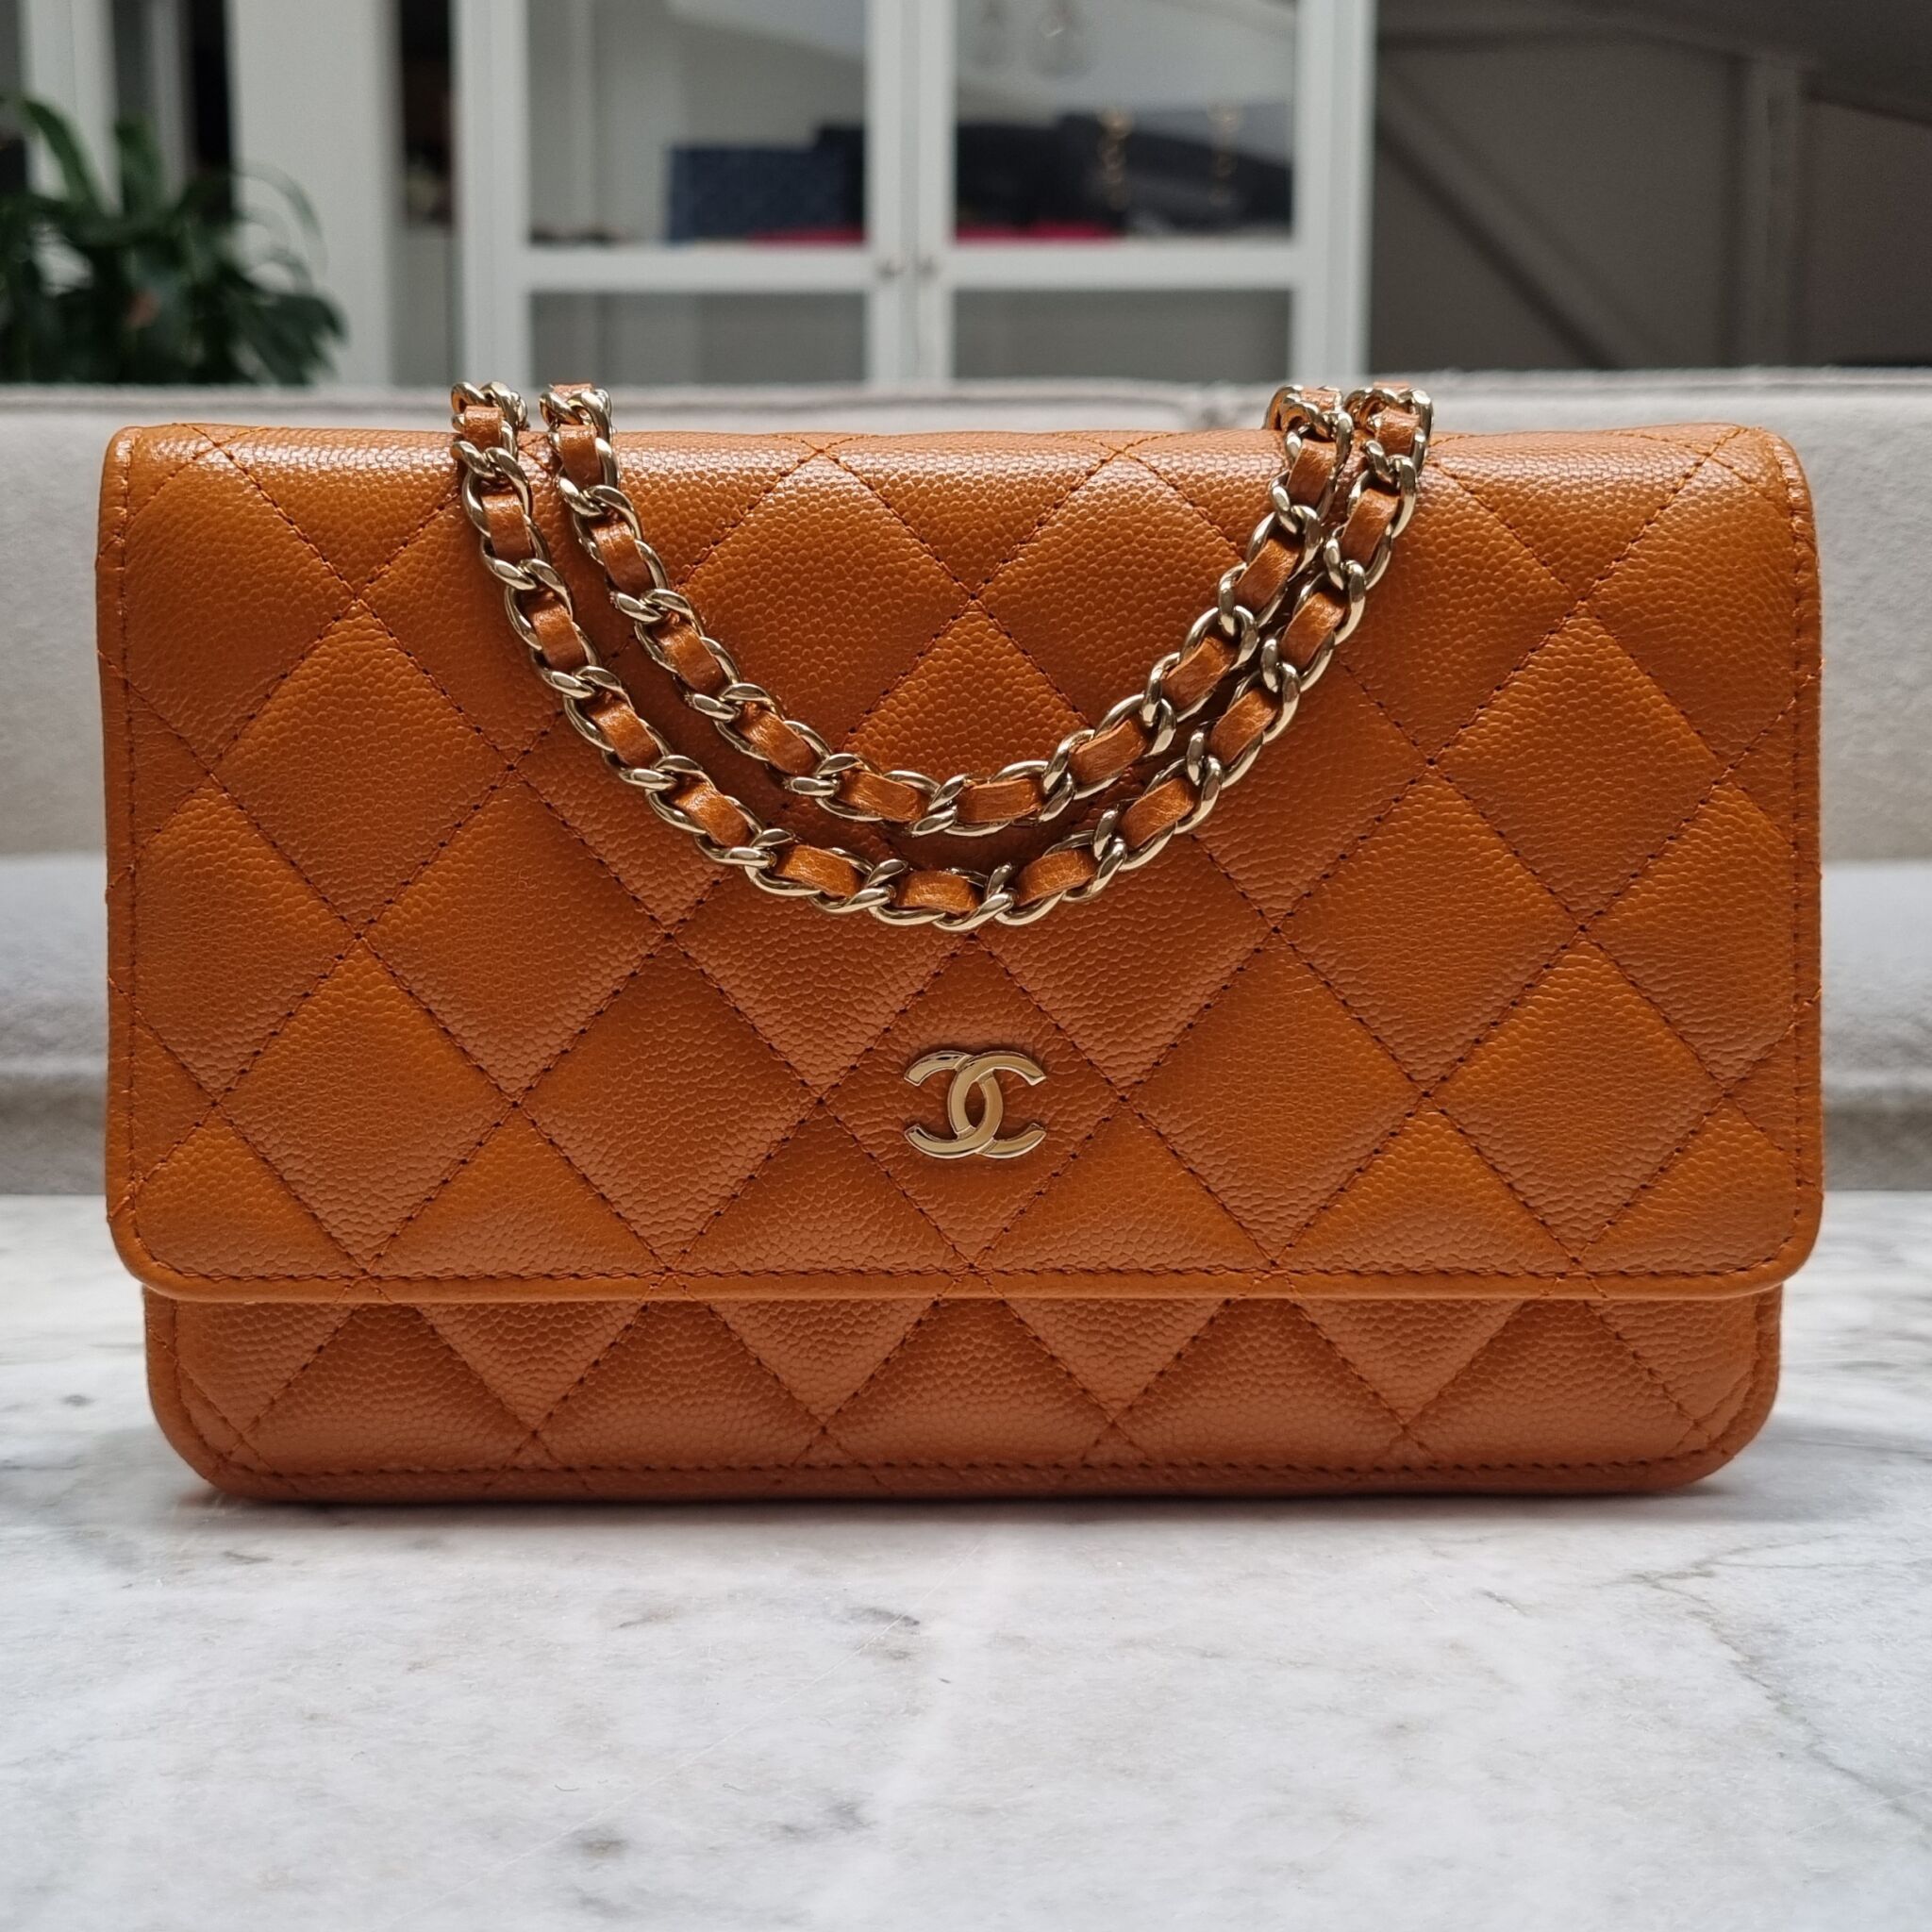 chanel classic flap bag brown new